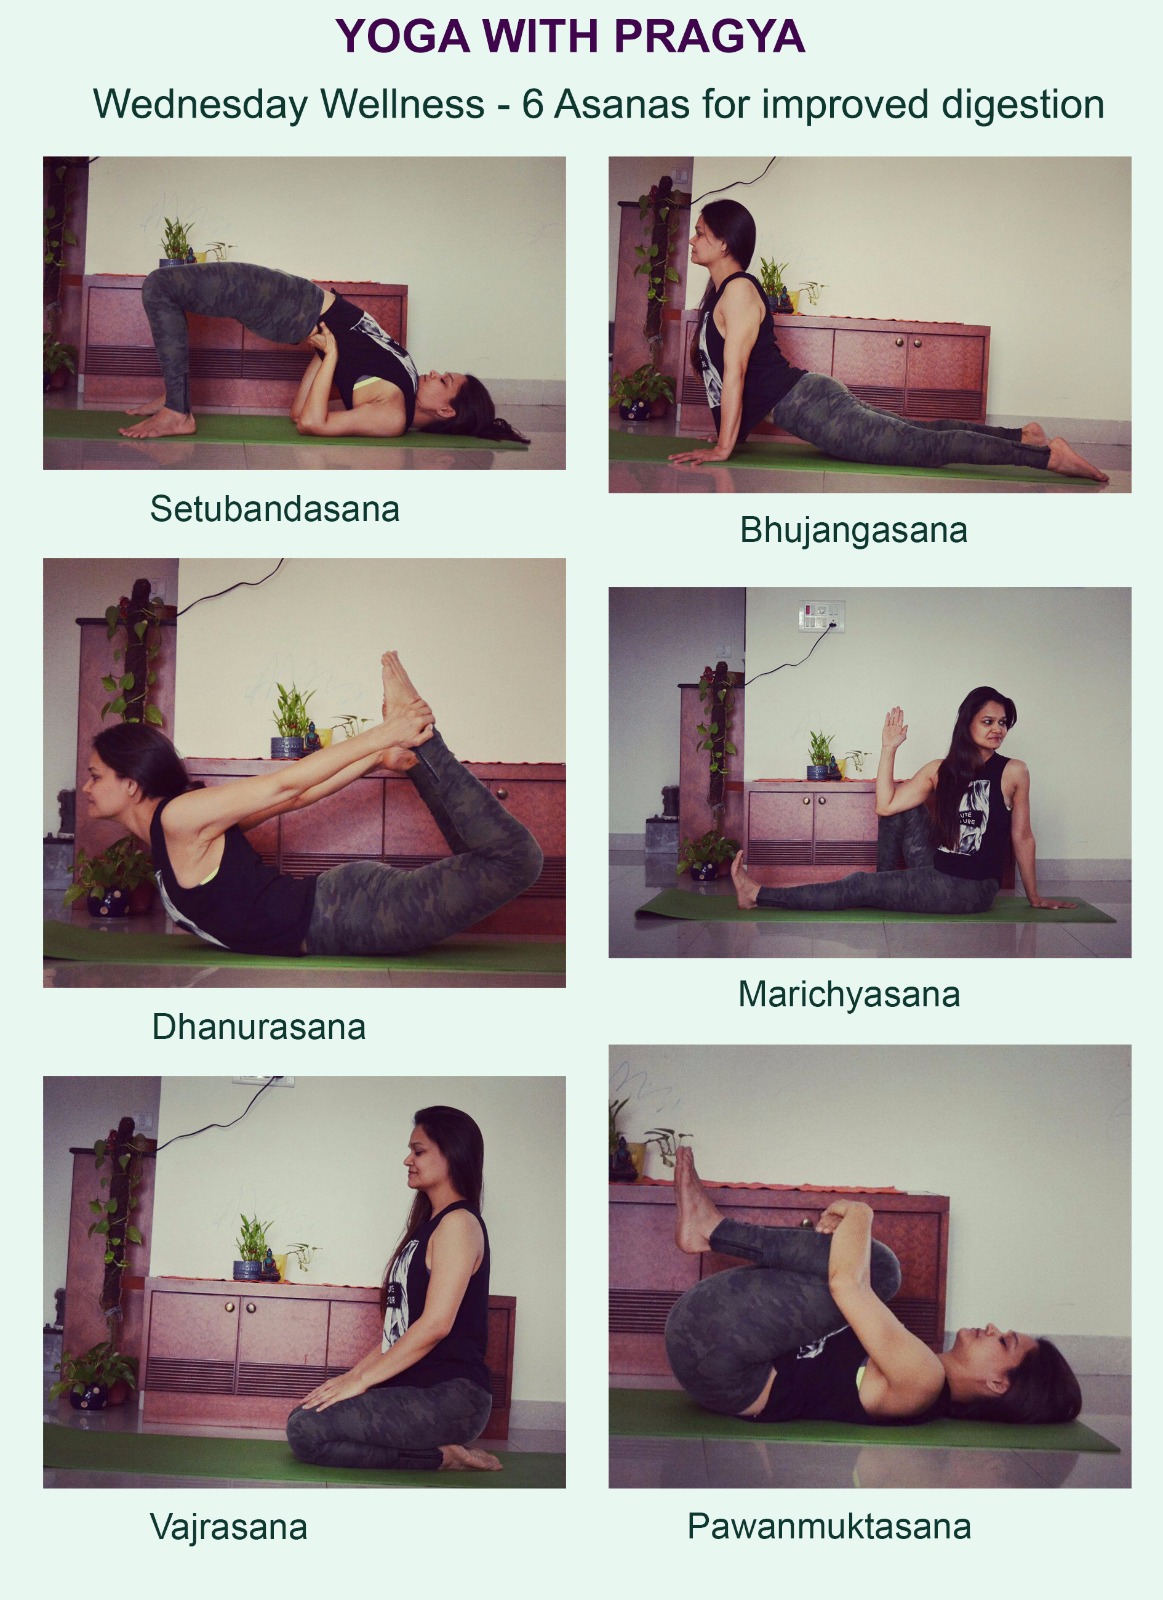 5 Yoga Poses to Banish Bloat Quickly| Experience Better Digestion -  Retreats For Me -Yoga Teacher Training Courses